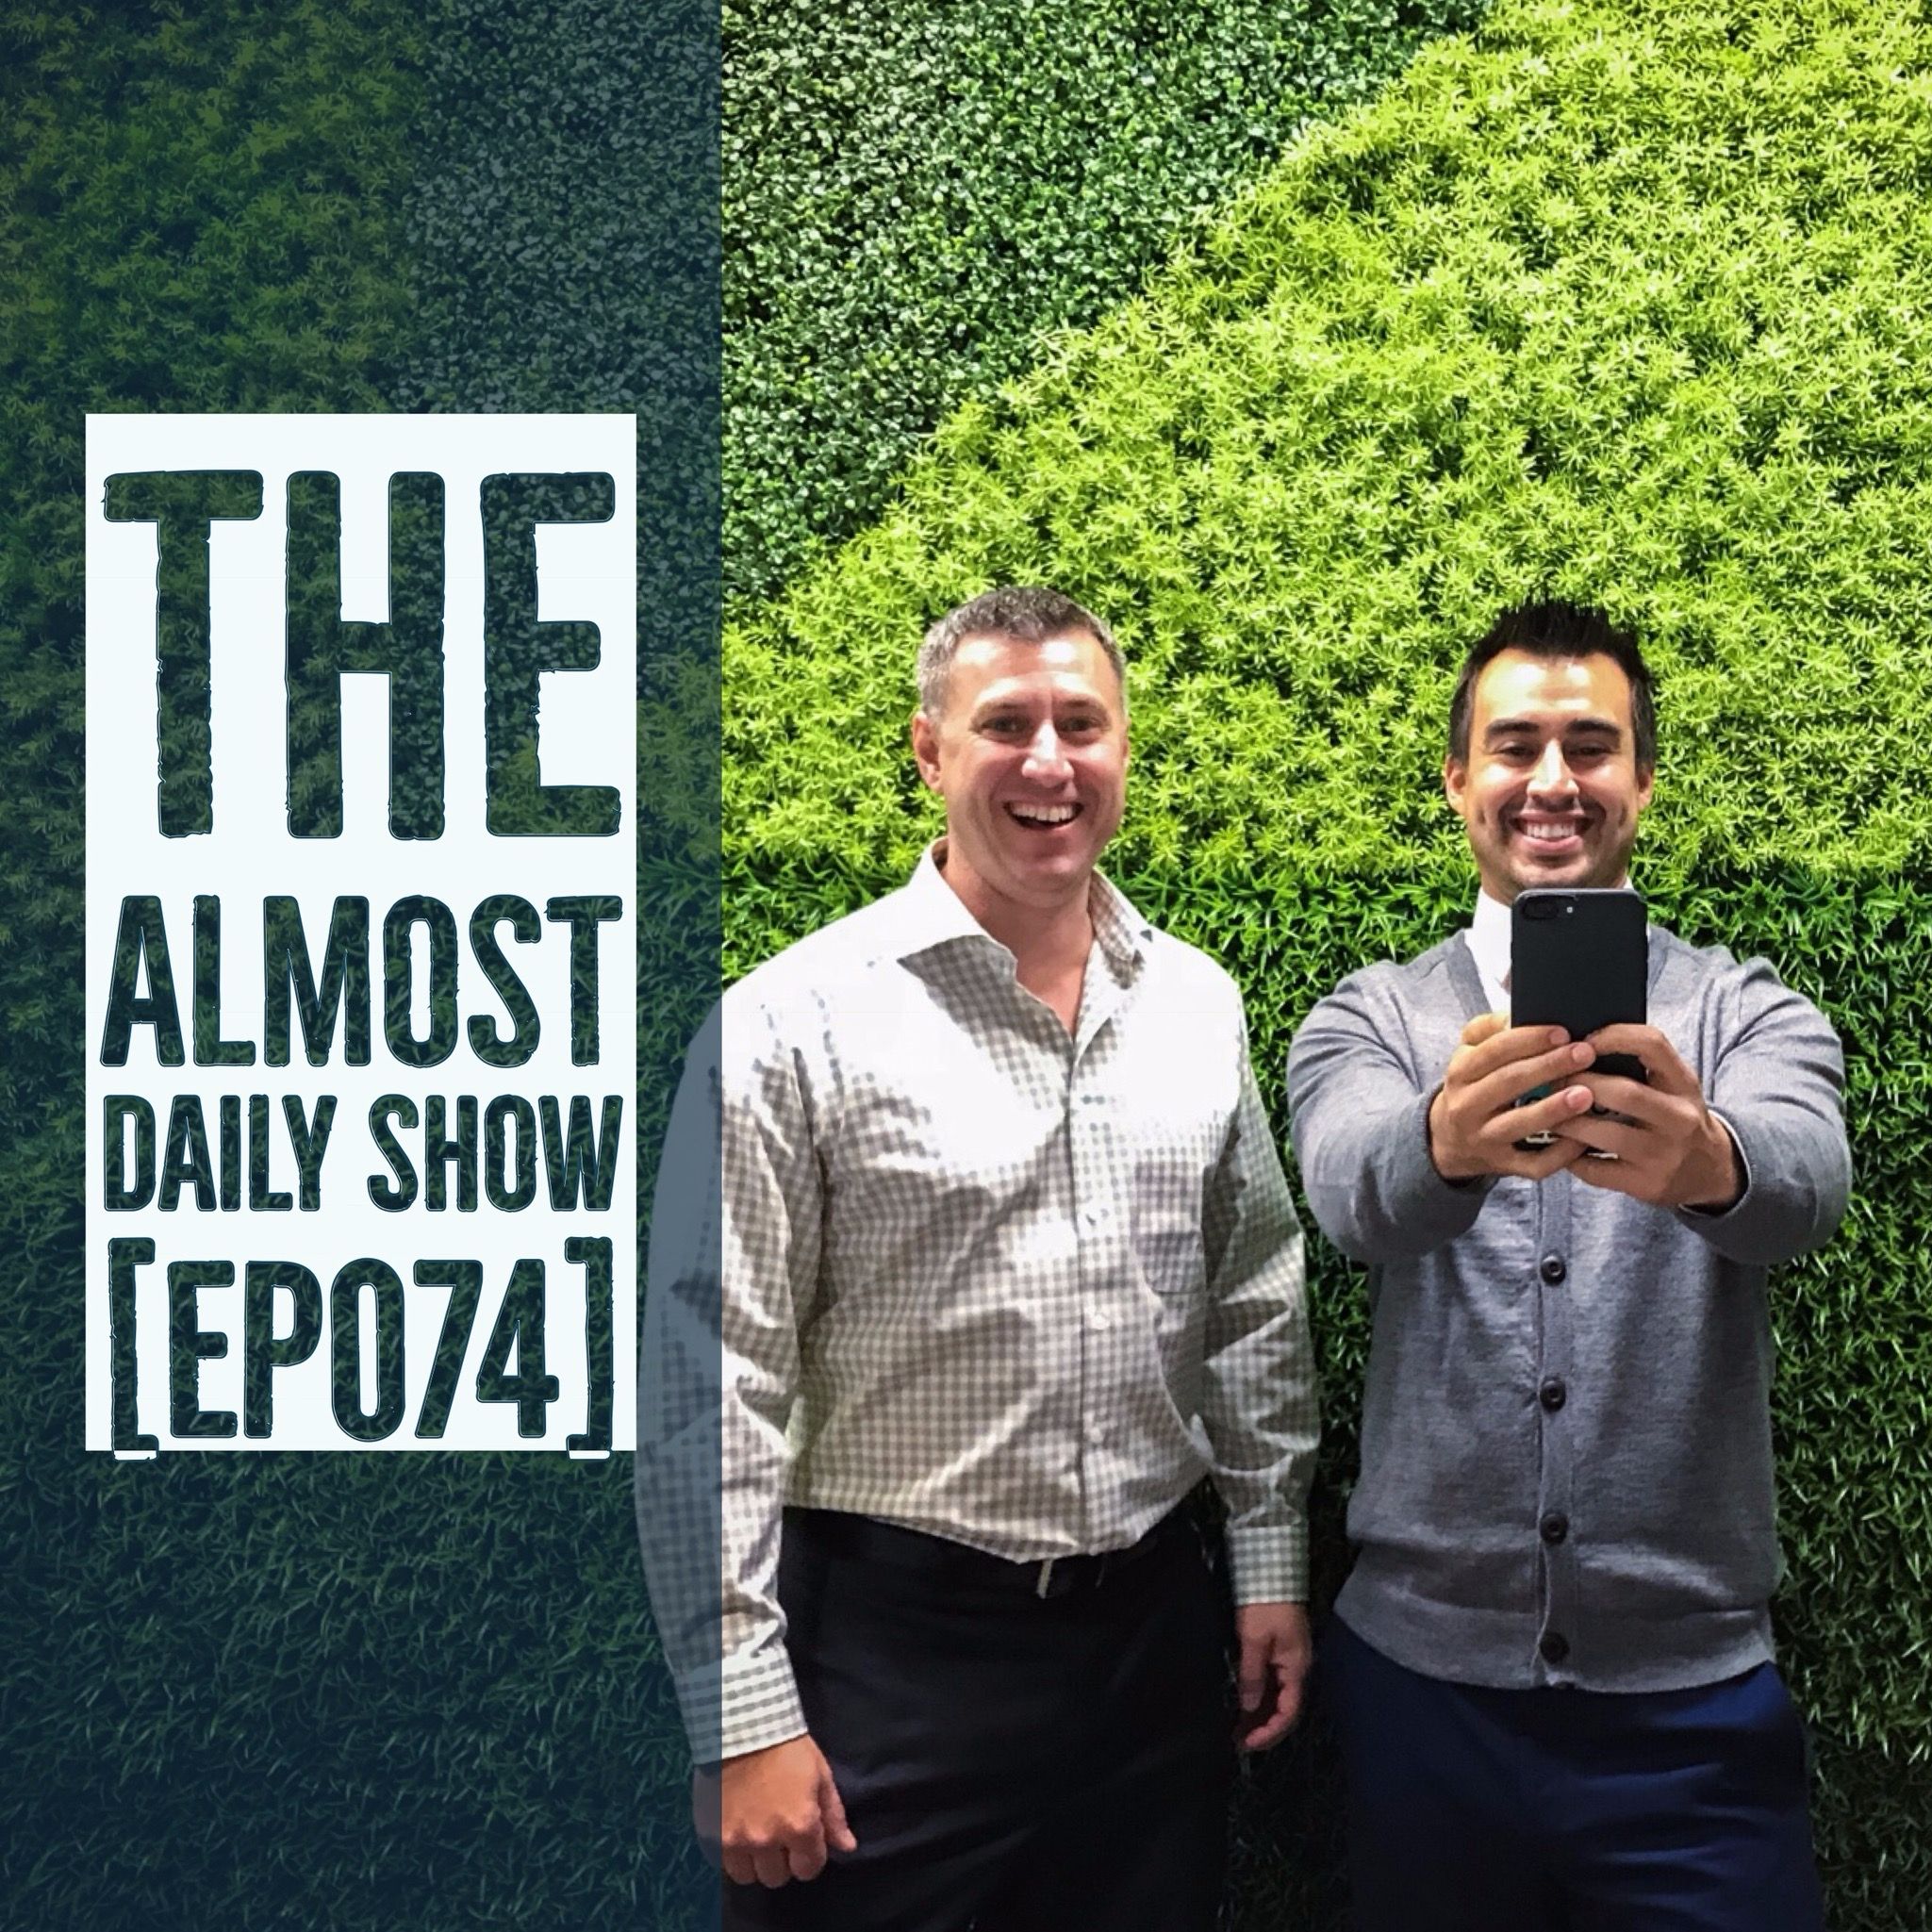 A Chat with Danny from Caffeine and Kilos | The Almost Daily Show Ep 074